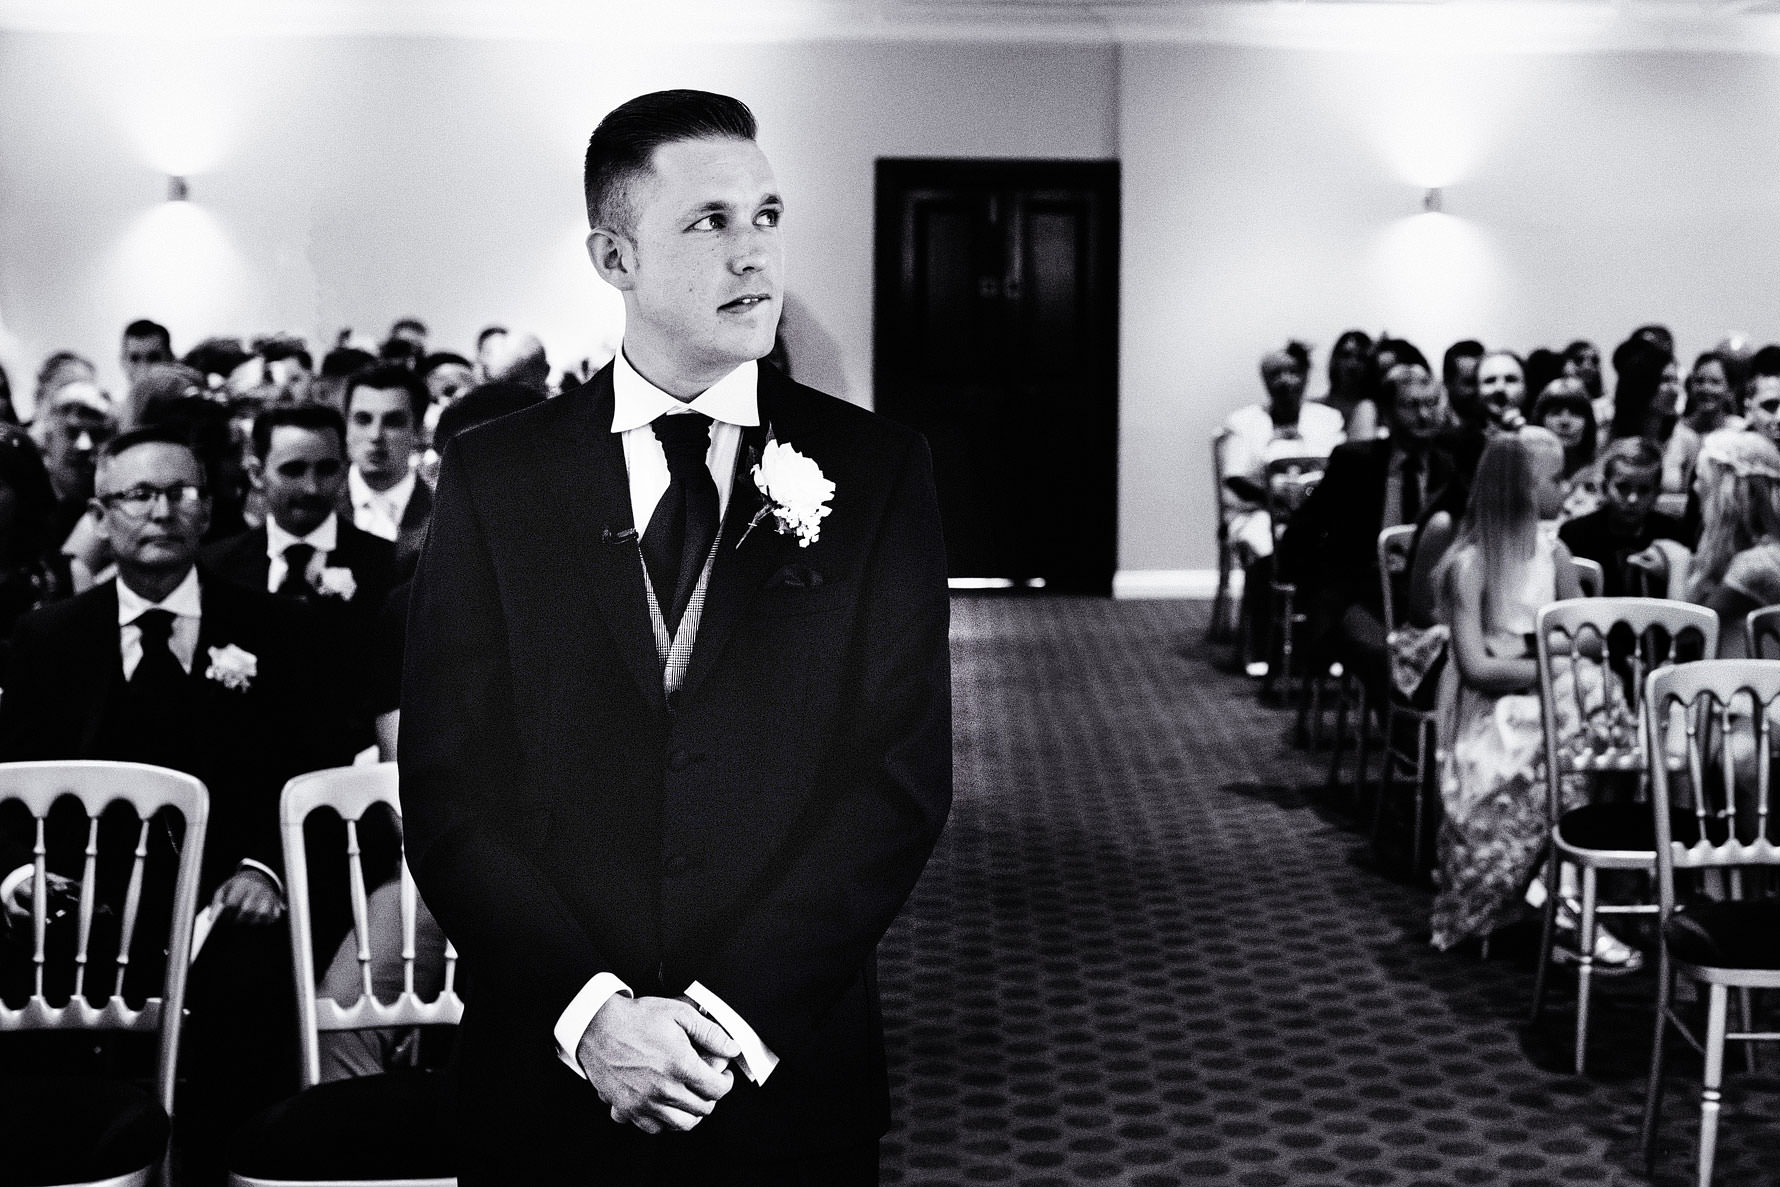 Needham House Wedding Photography By Elliot W Patching